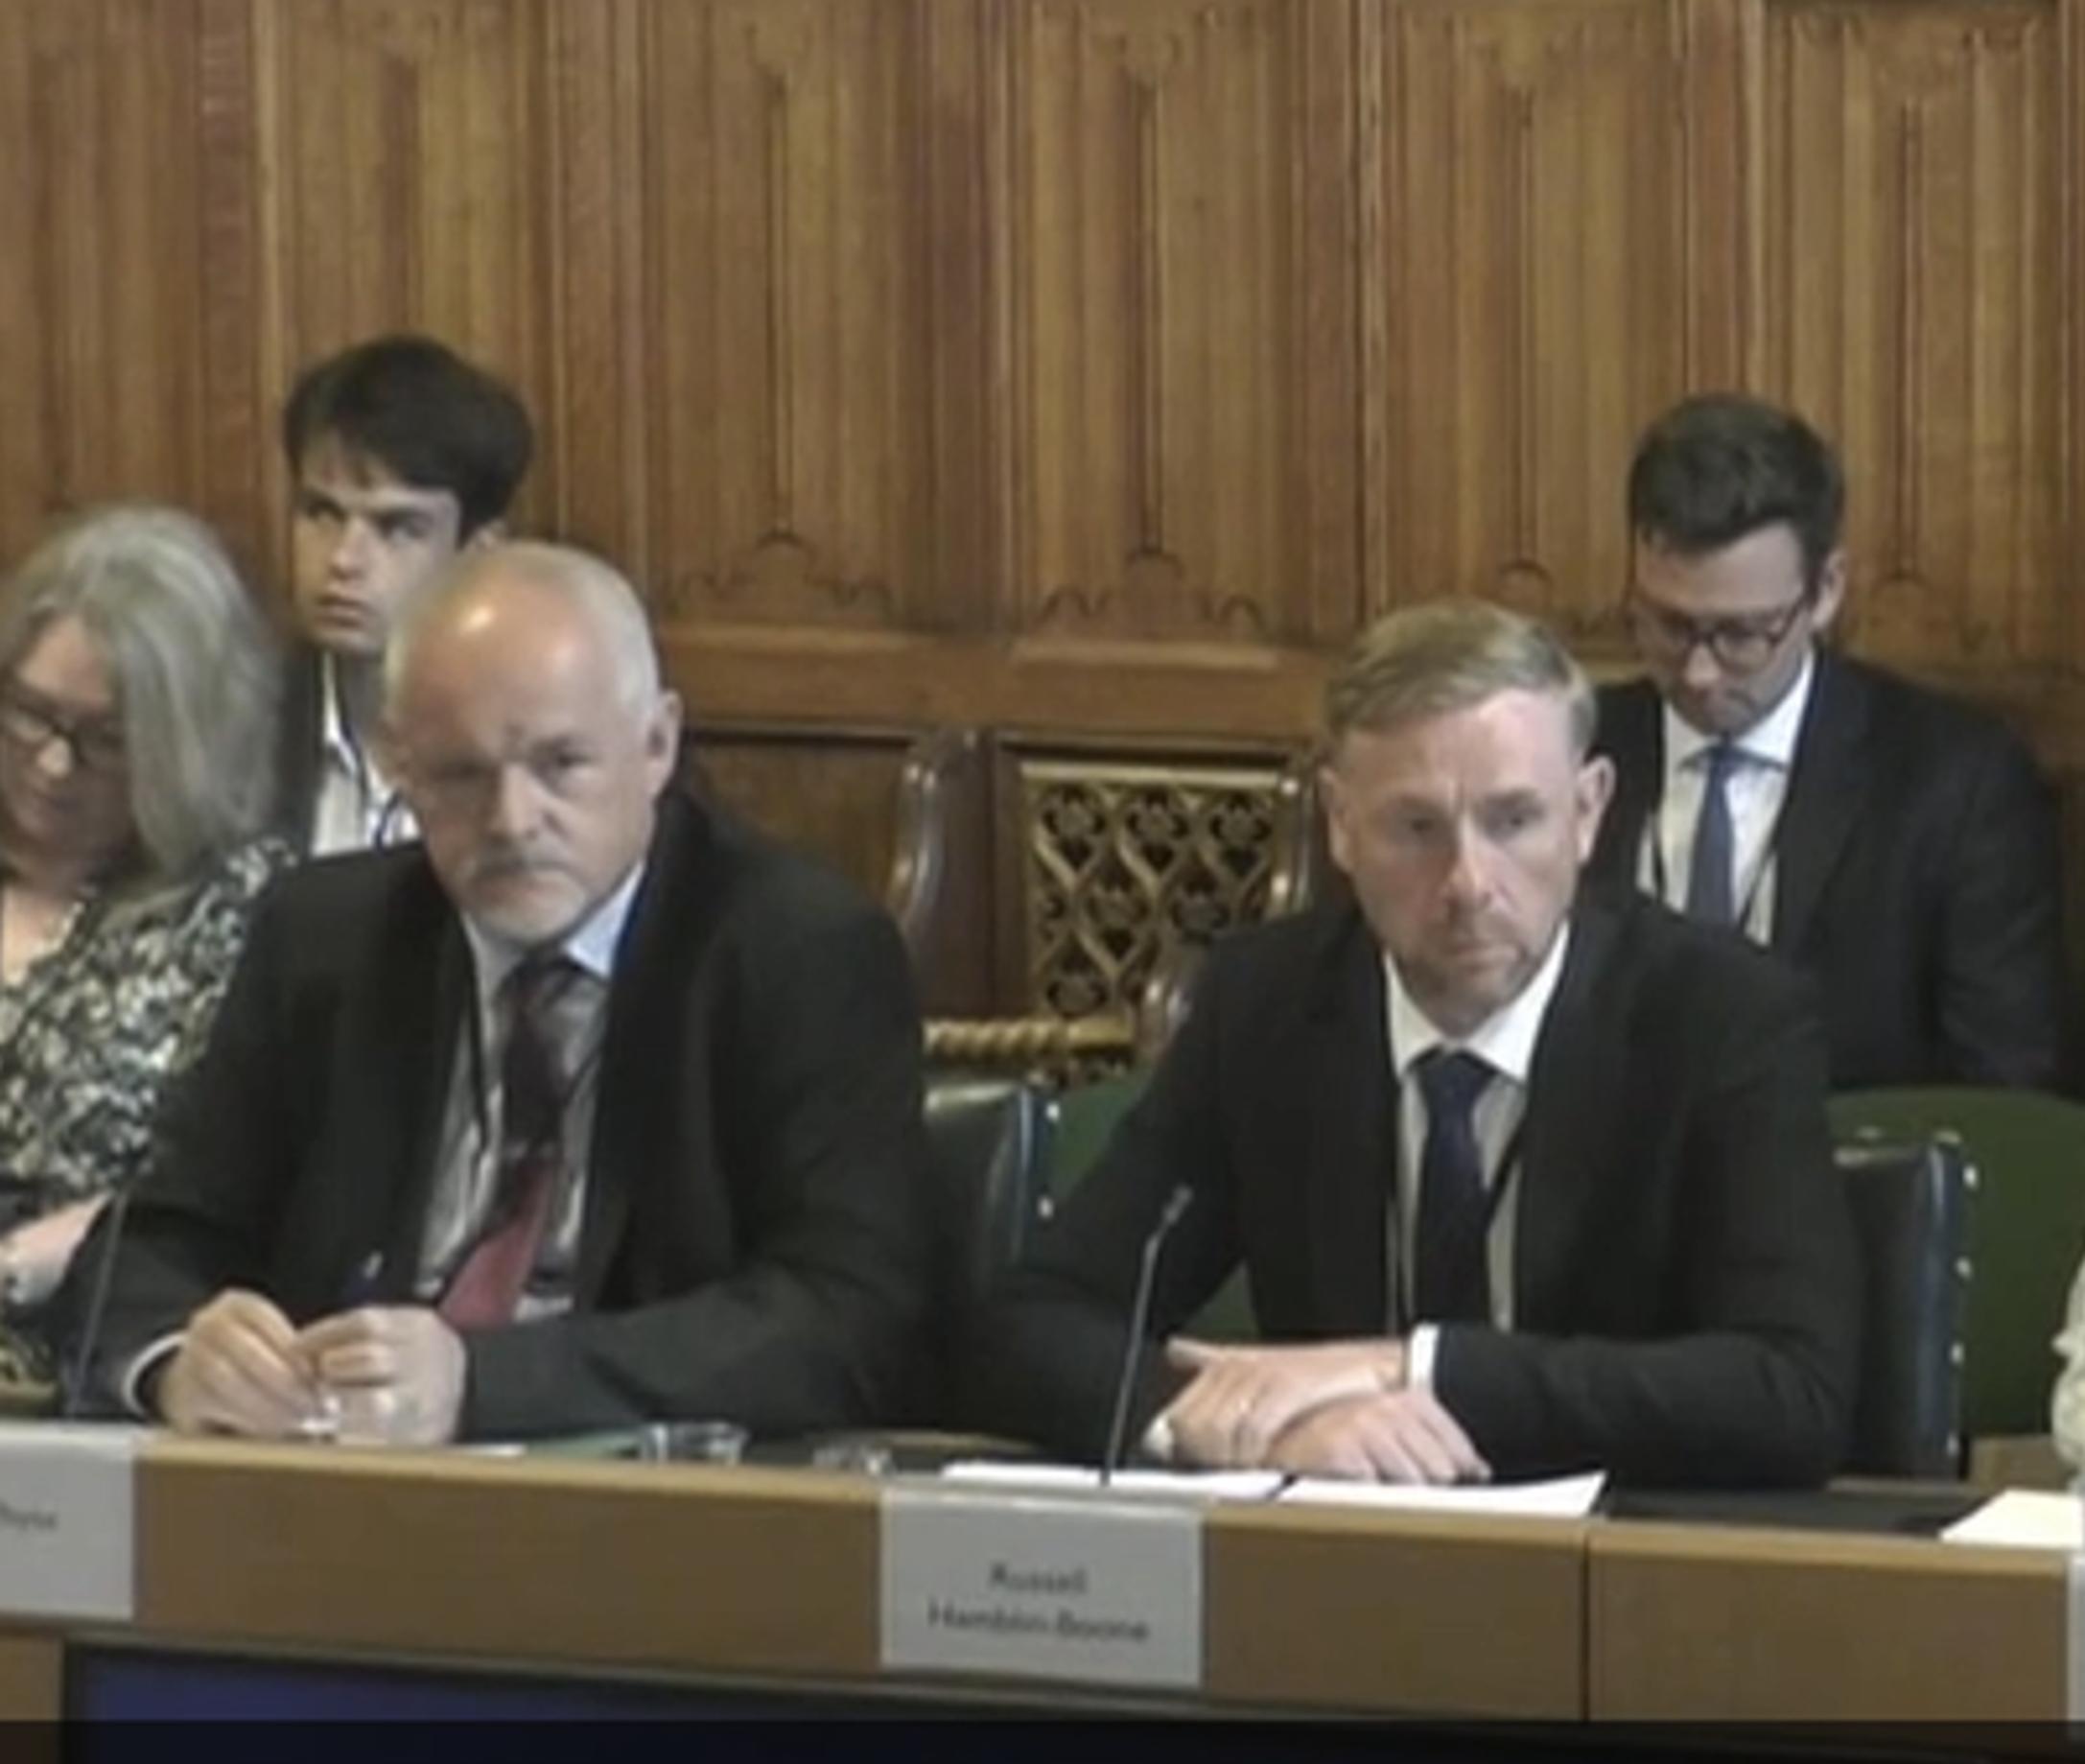 Russell Hamblin-Boone and Paul Whyte give evidence to MPs